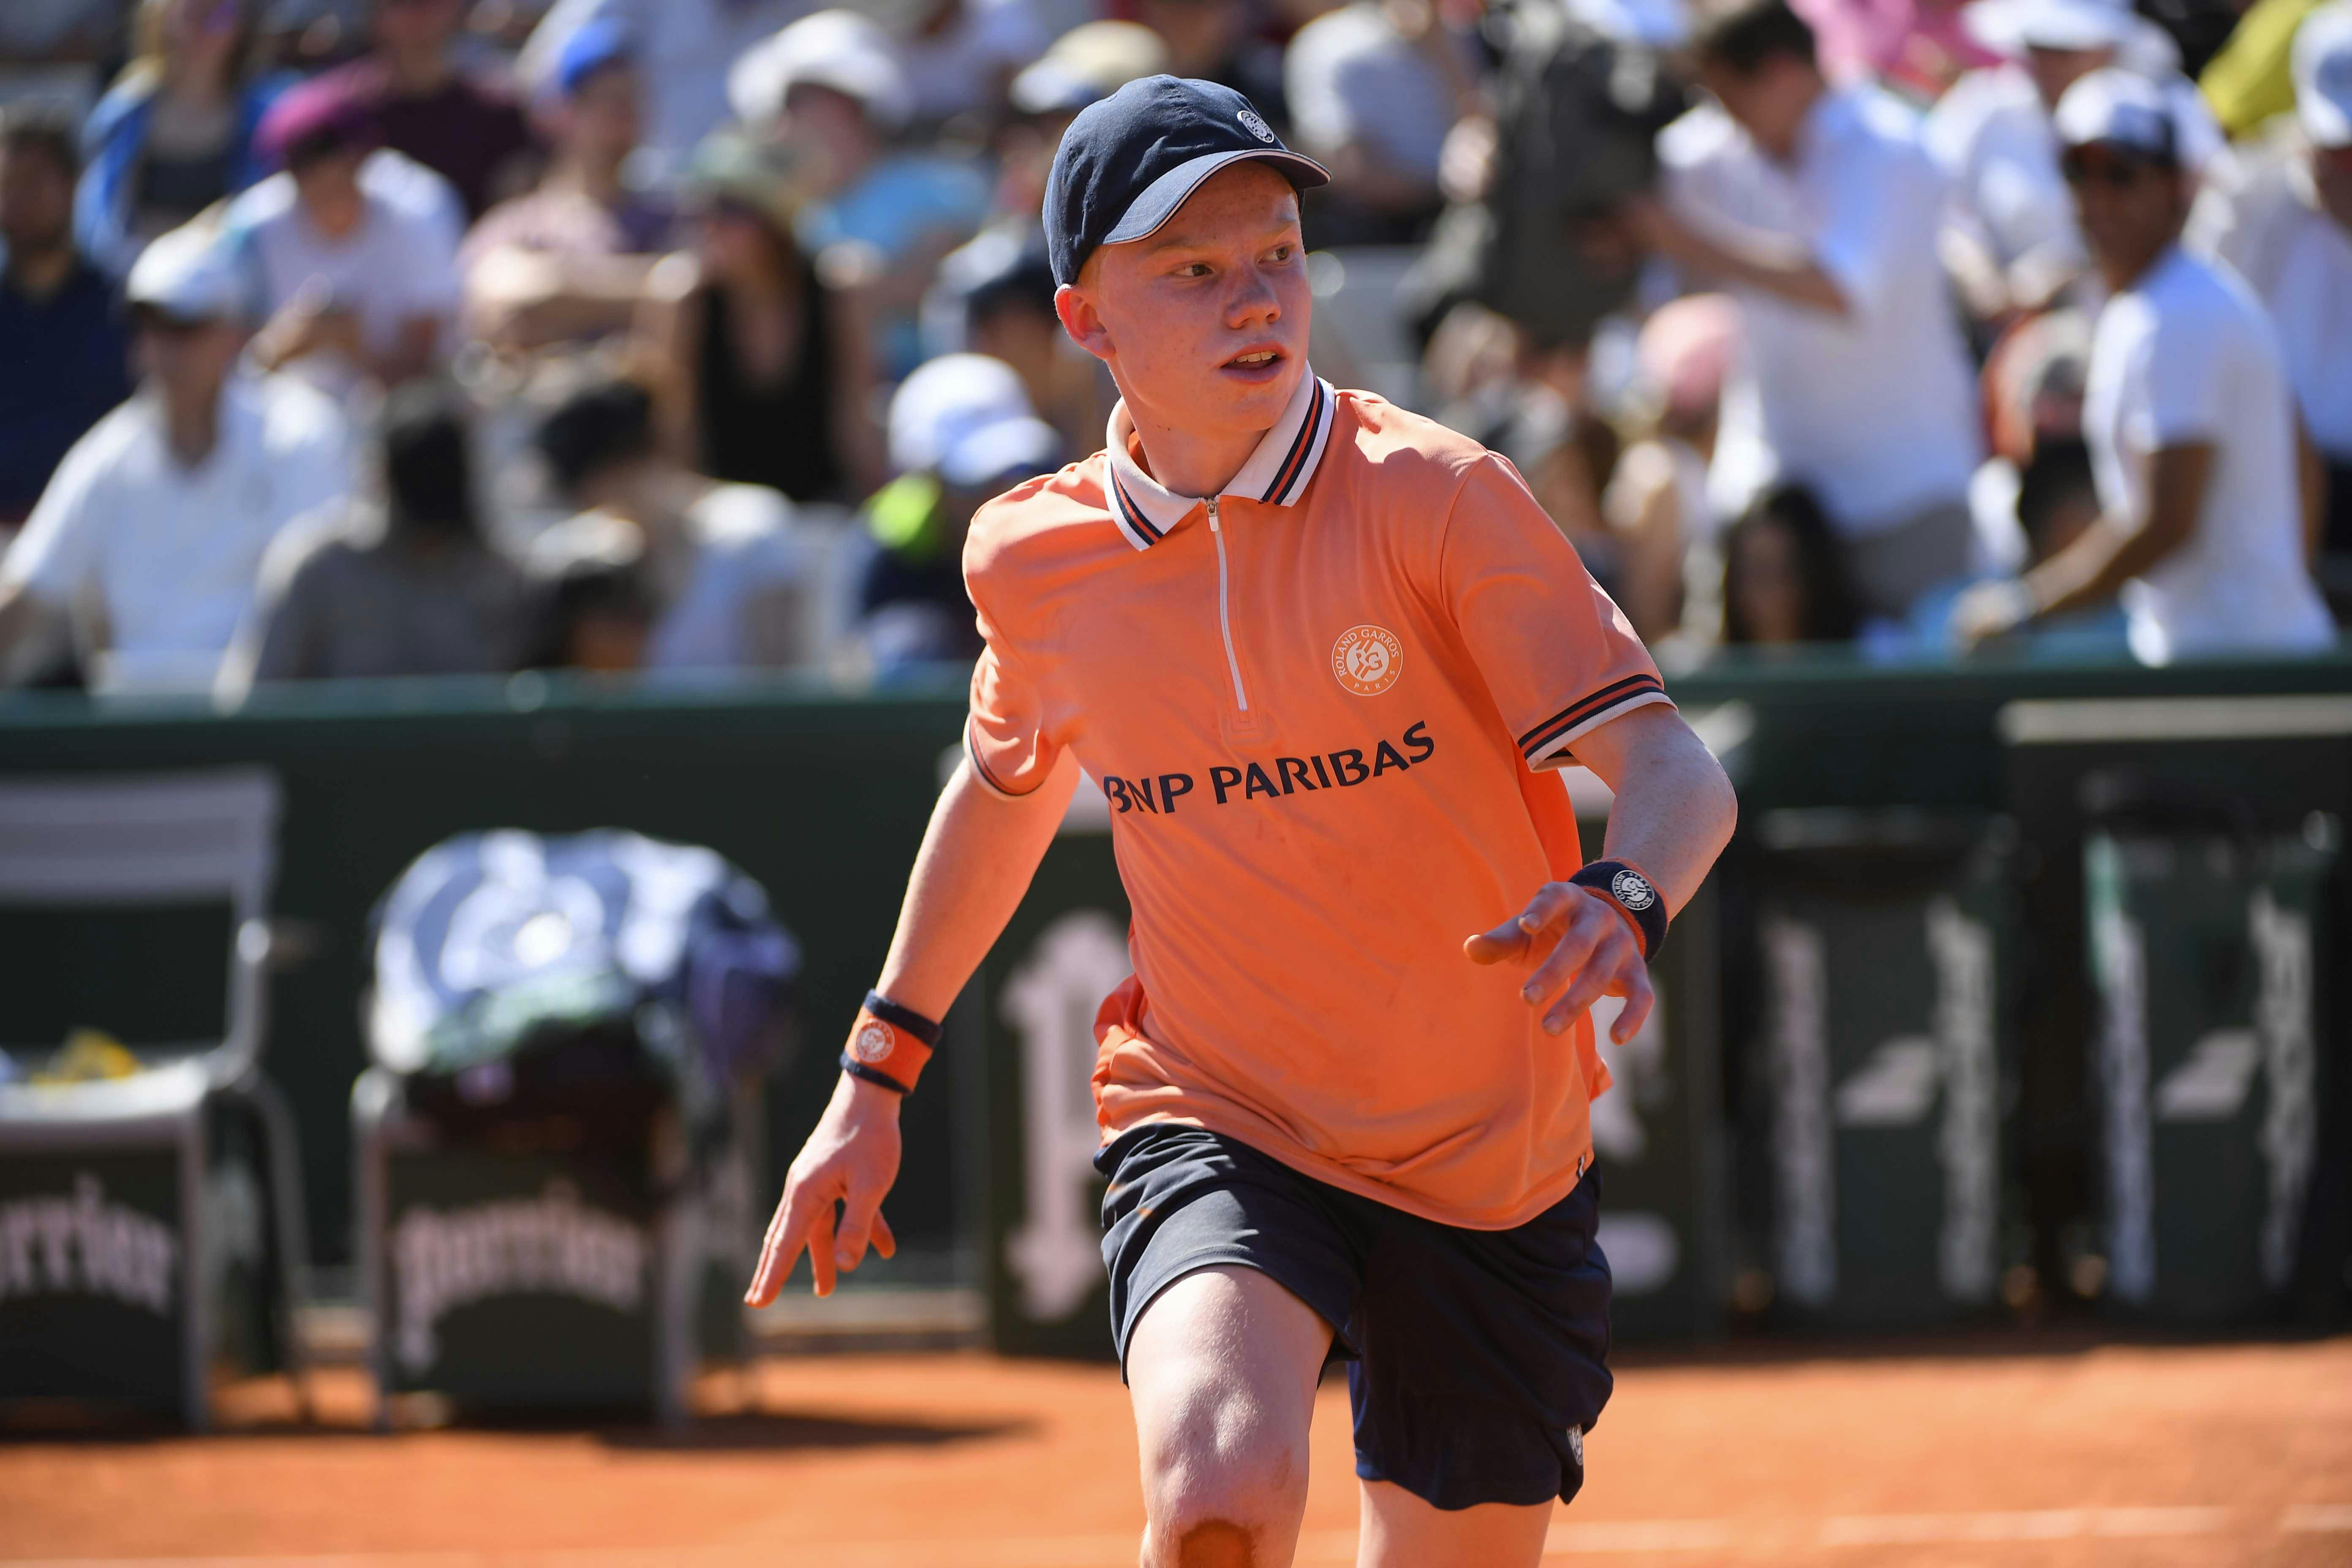 Day In The Life Ball Kids Roland Garros The 22 Roland Garros Tournament Official Site